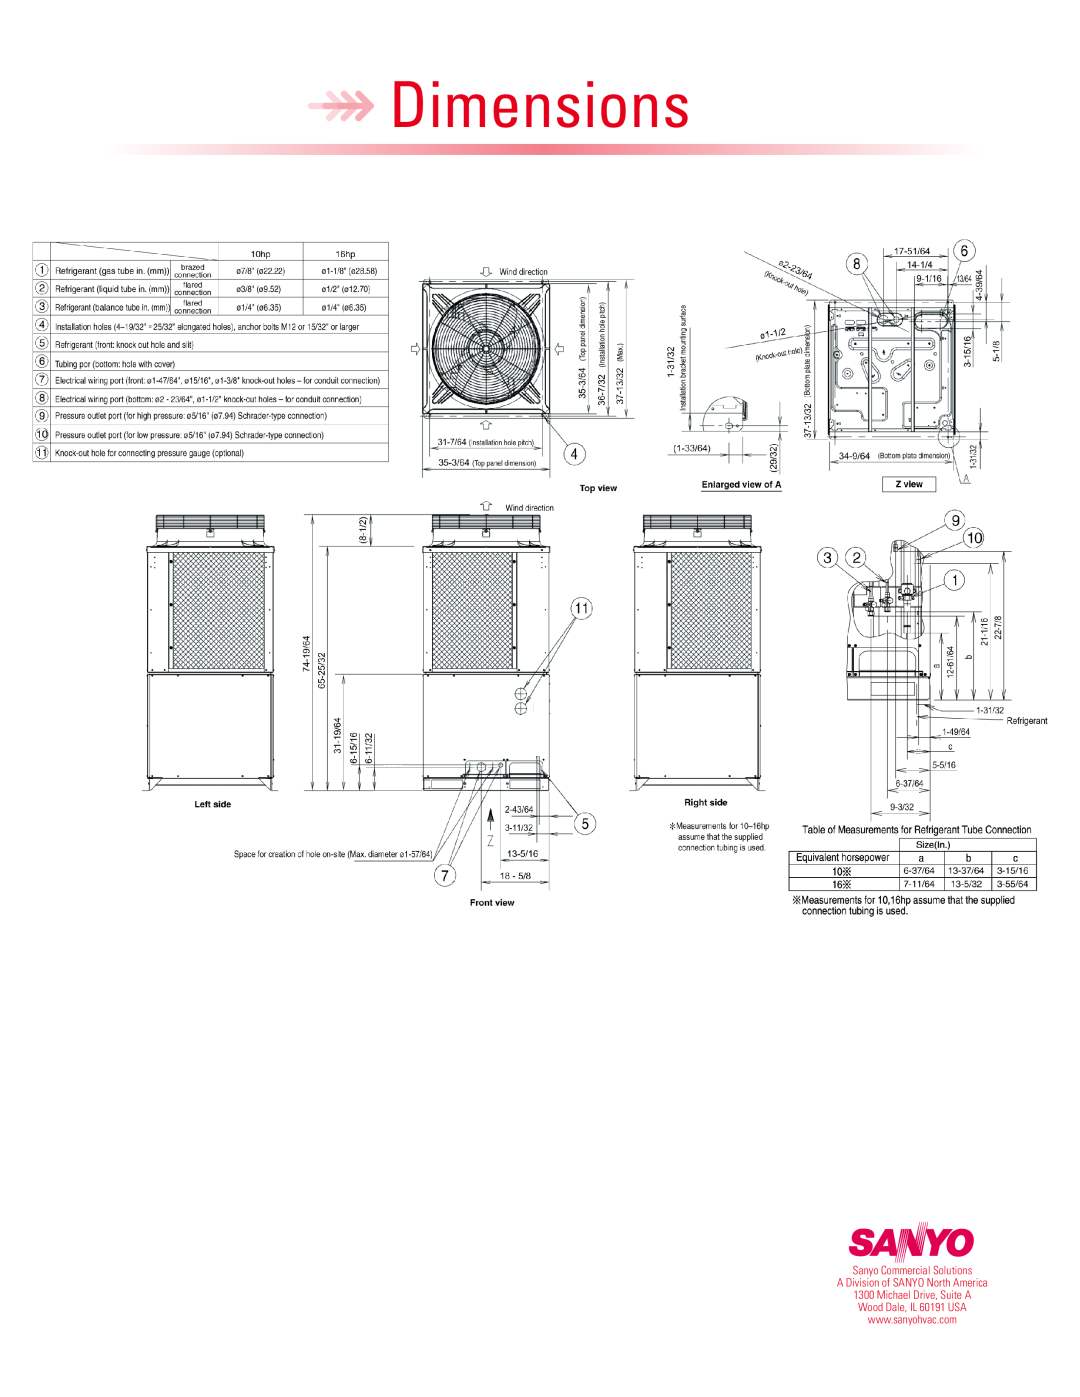 Sanyo WCHDX32053 warranty Dimensions, Sanyo Commercial Solutions, A Division of SANYO North America, Michael Drive, Suite A 